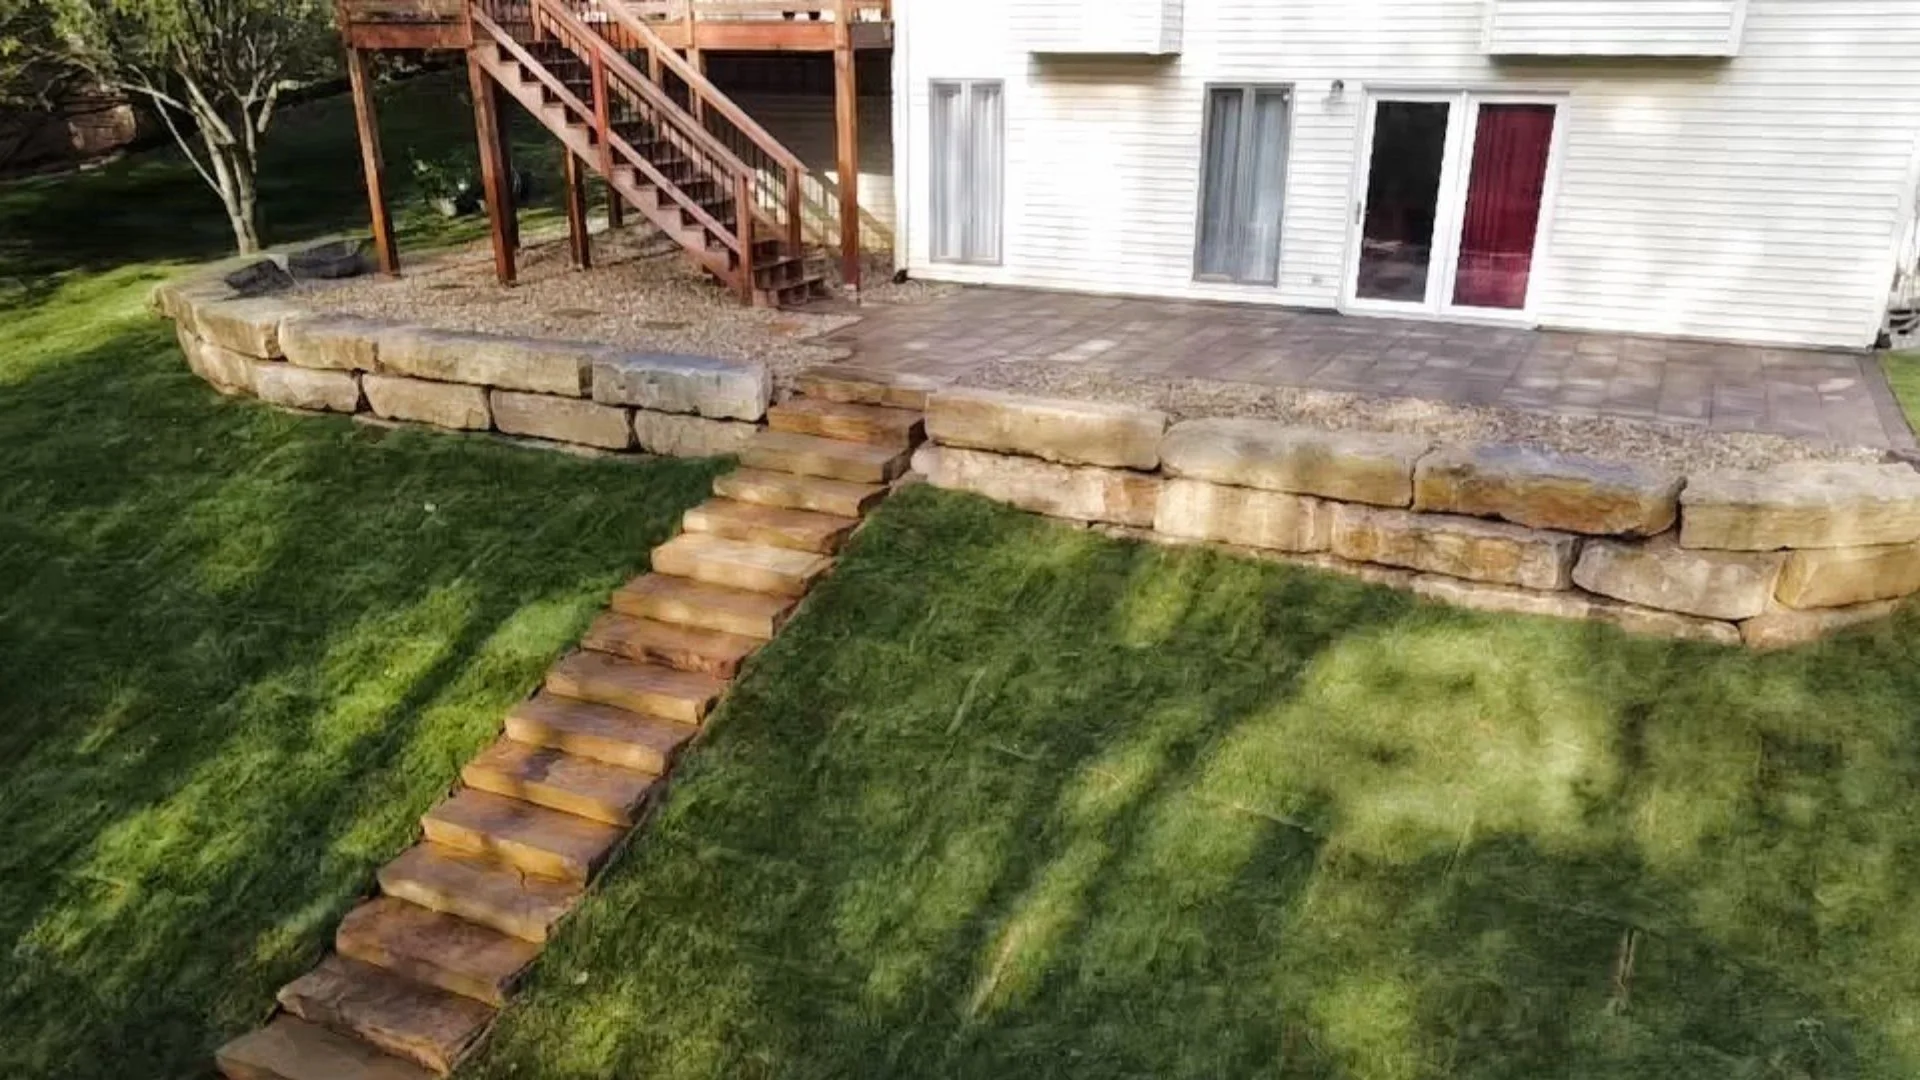 Is It Possible to Install a Patio on a Sloped Yard?